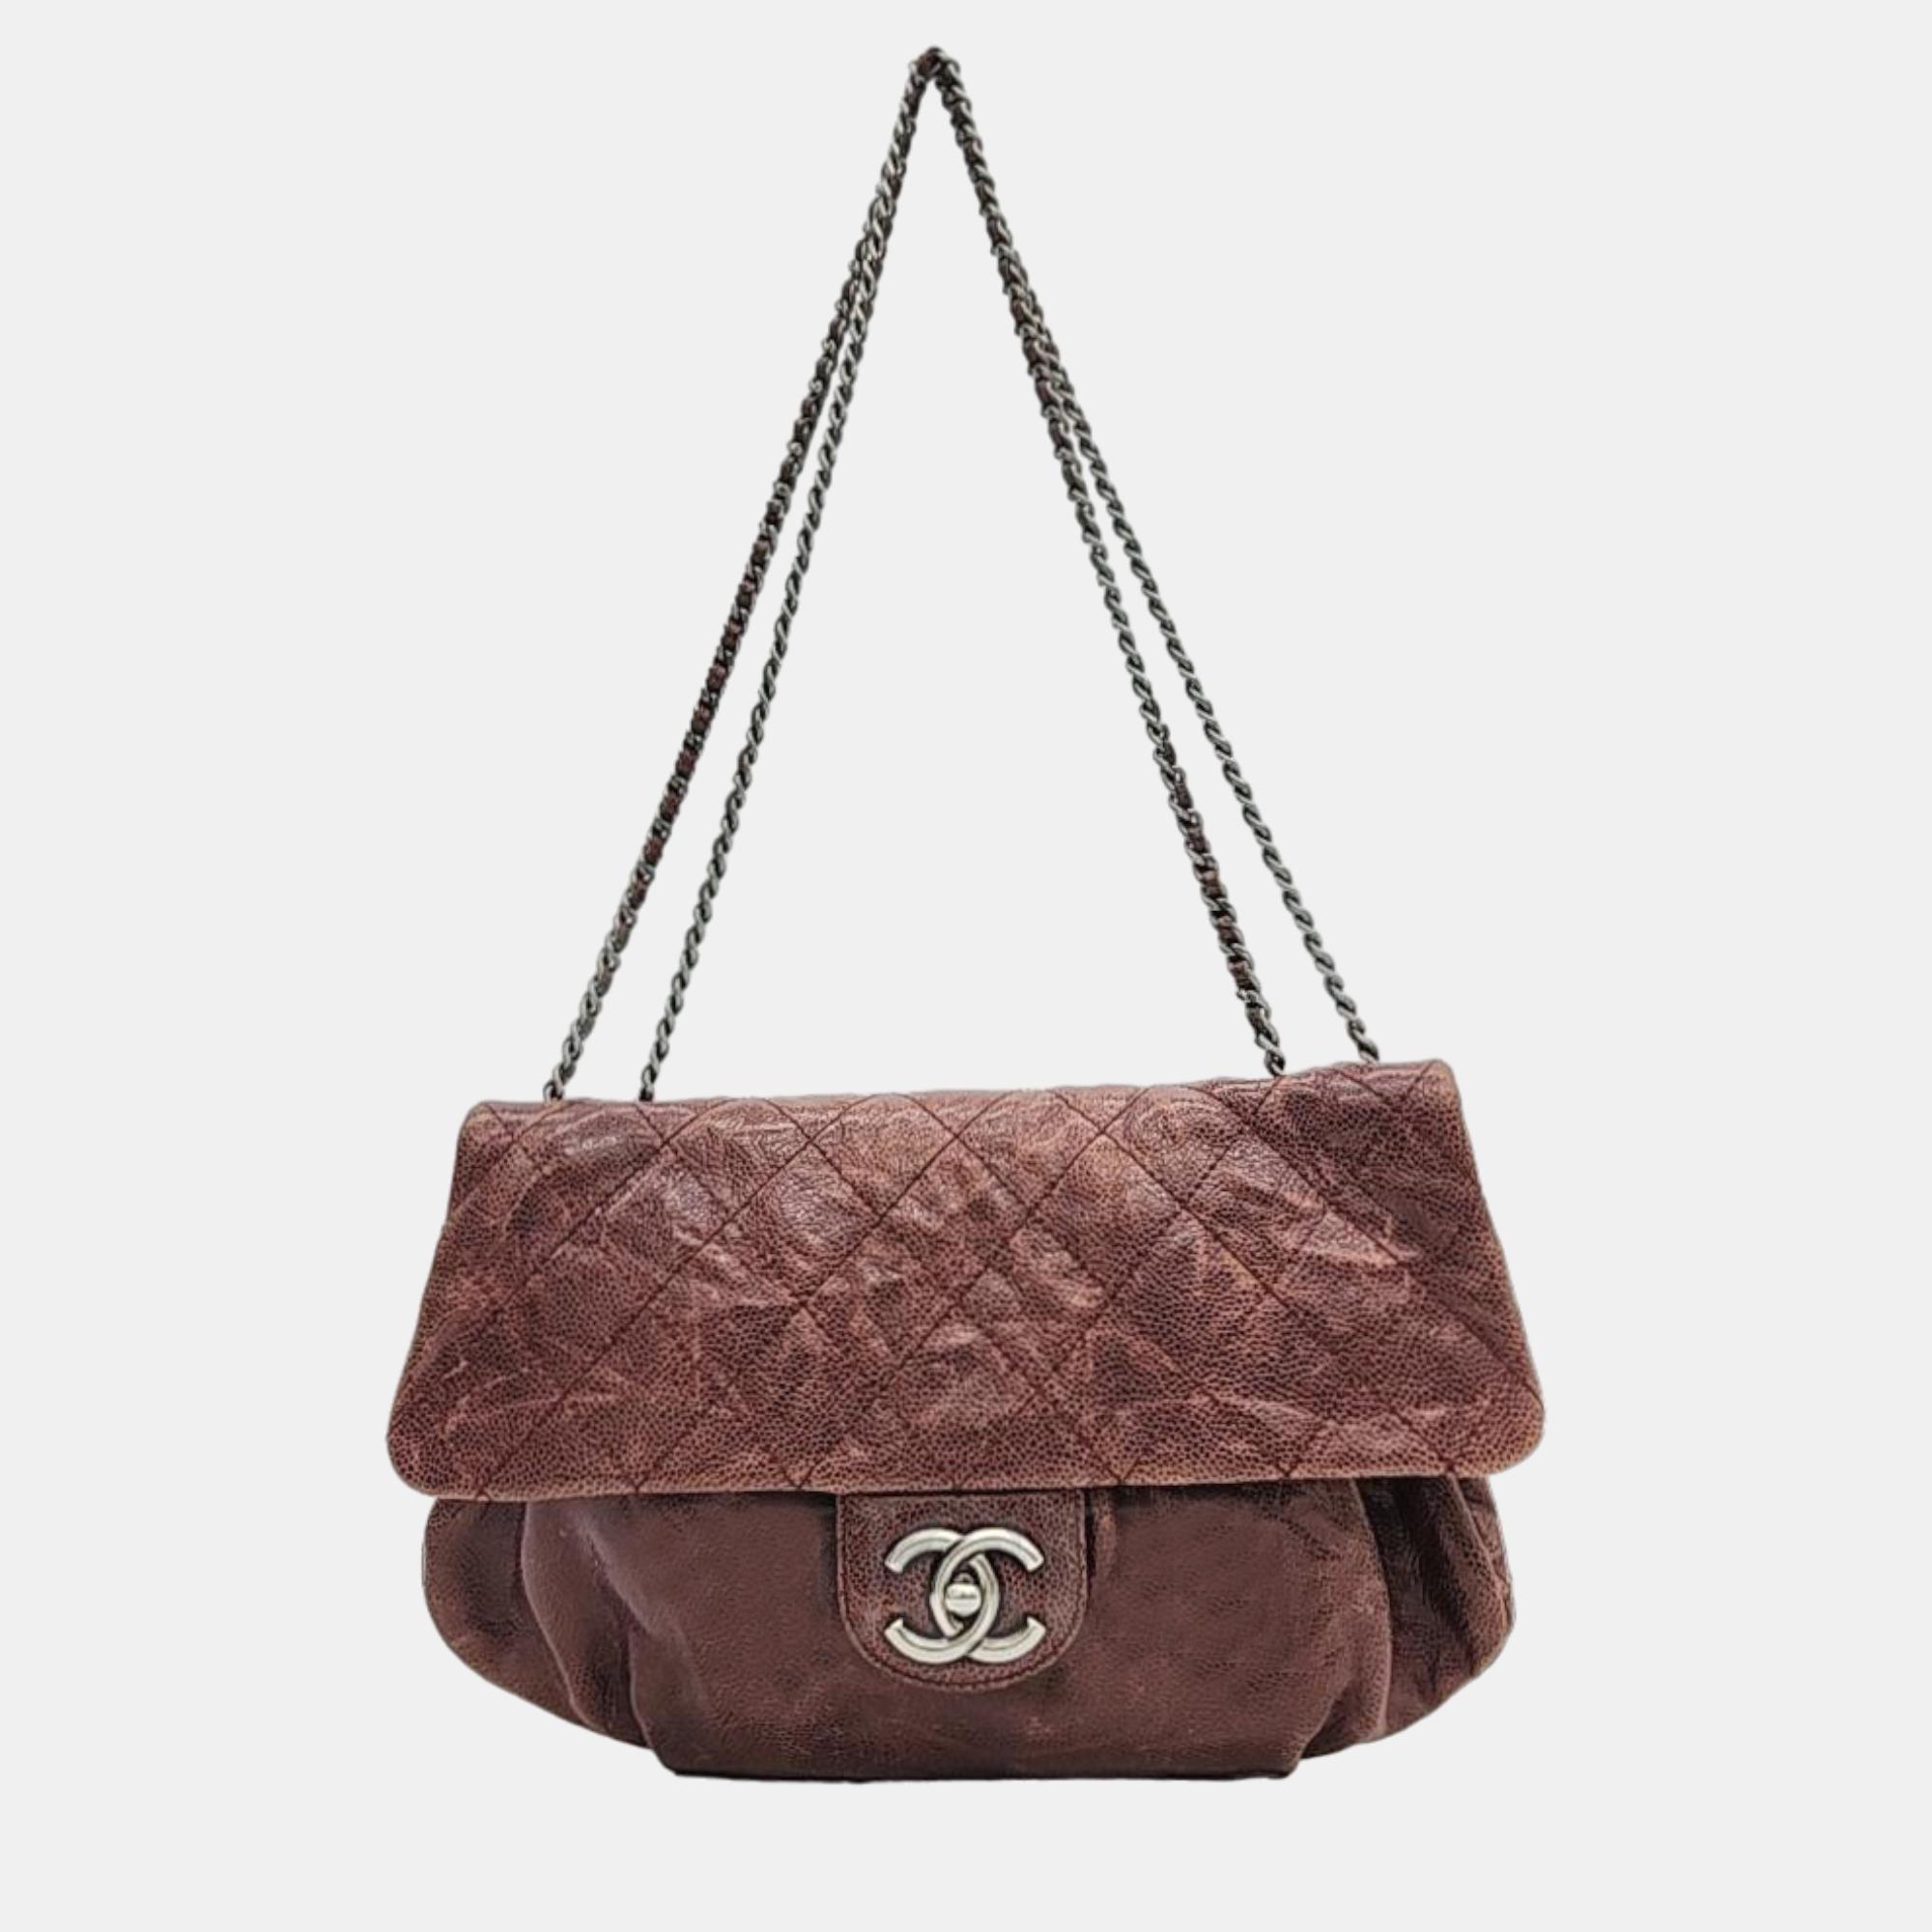 Pre-owned Chanel Burgundy Leather Elastic Cc Flap Bag